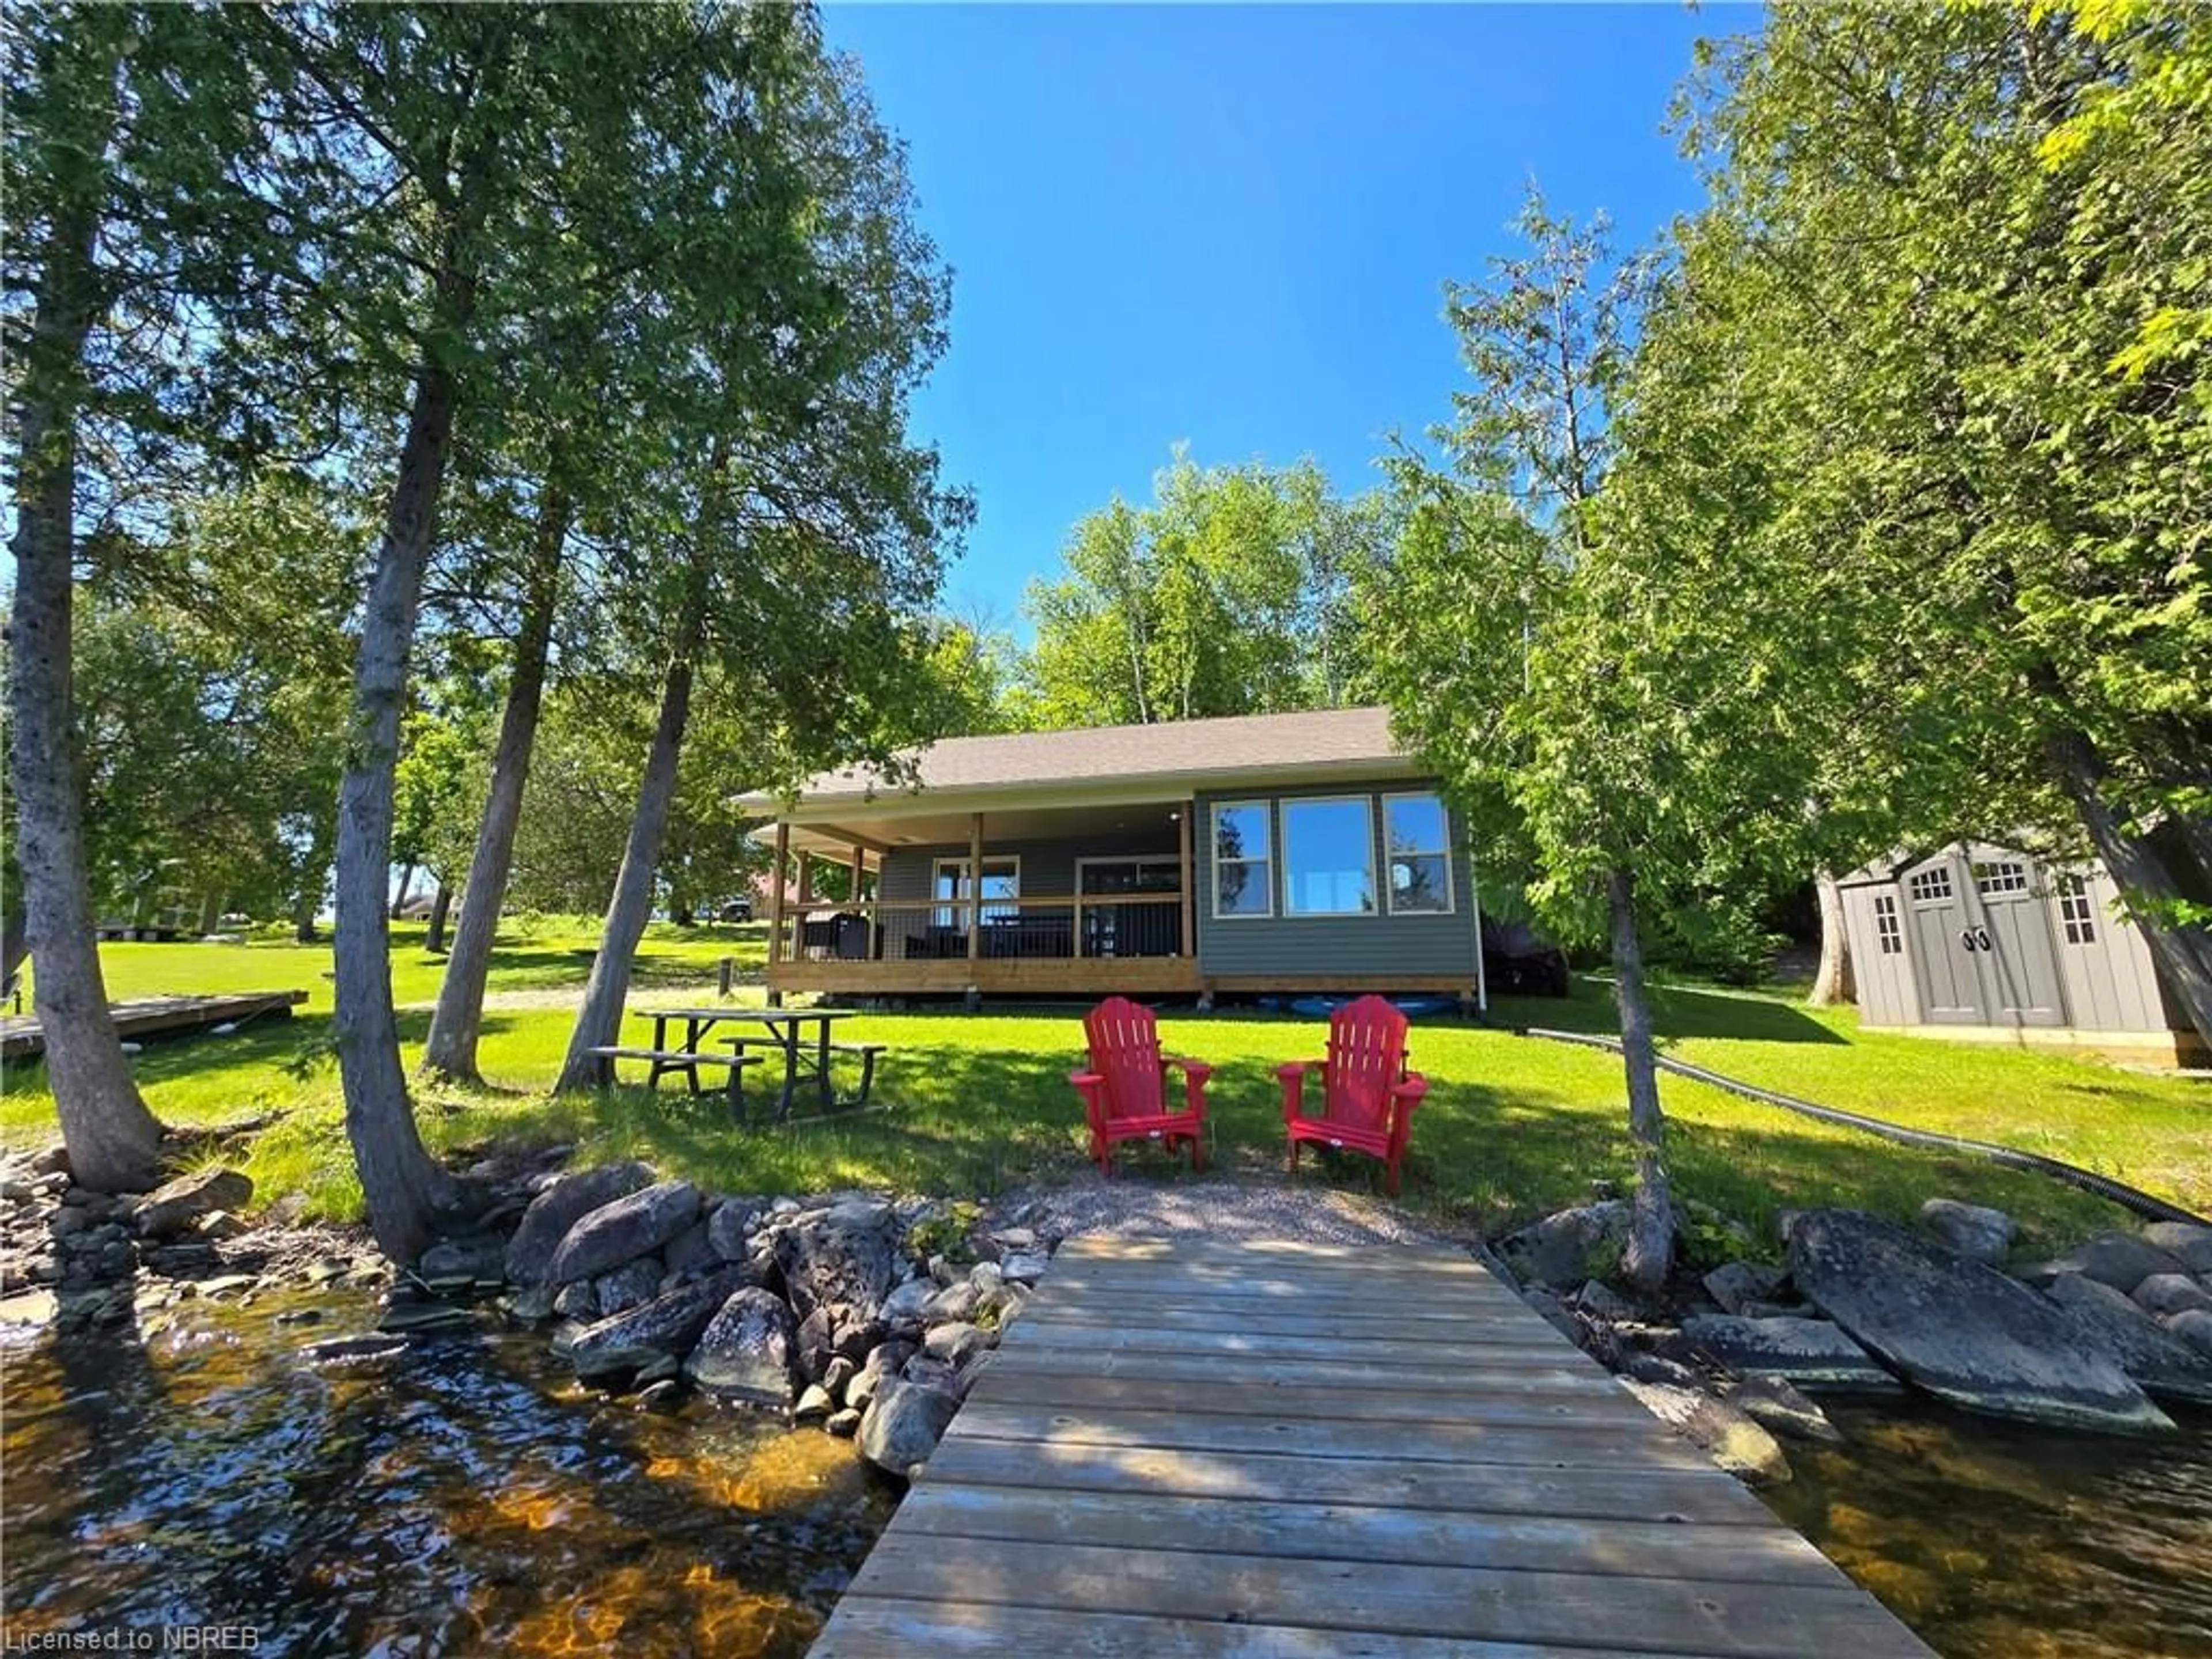 Cottage for 207D Moose Point Rd, Crystal Falls Ontario P0H 1L0